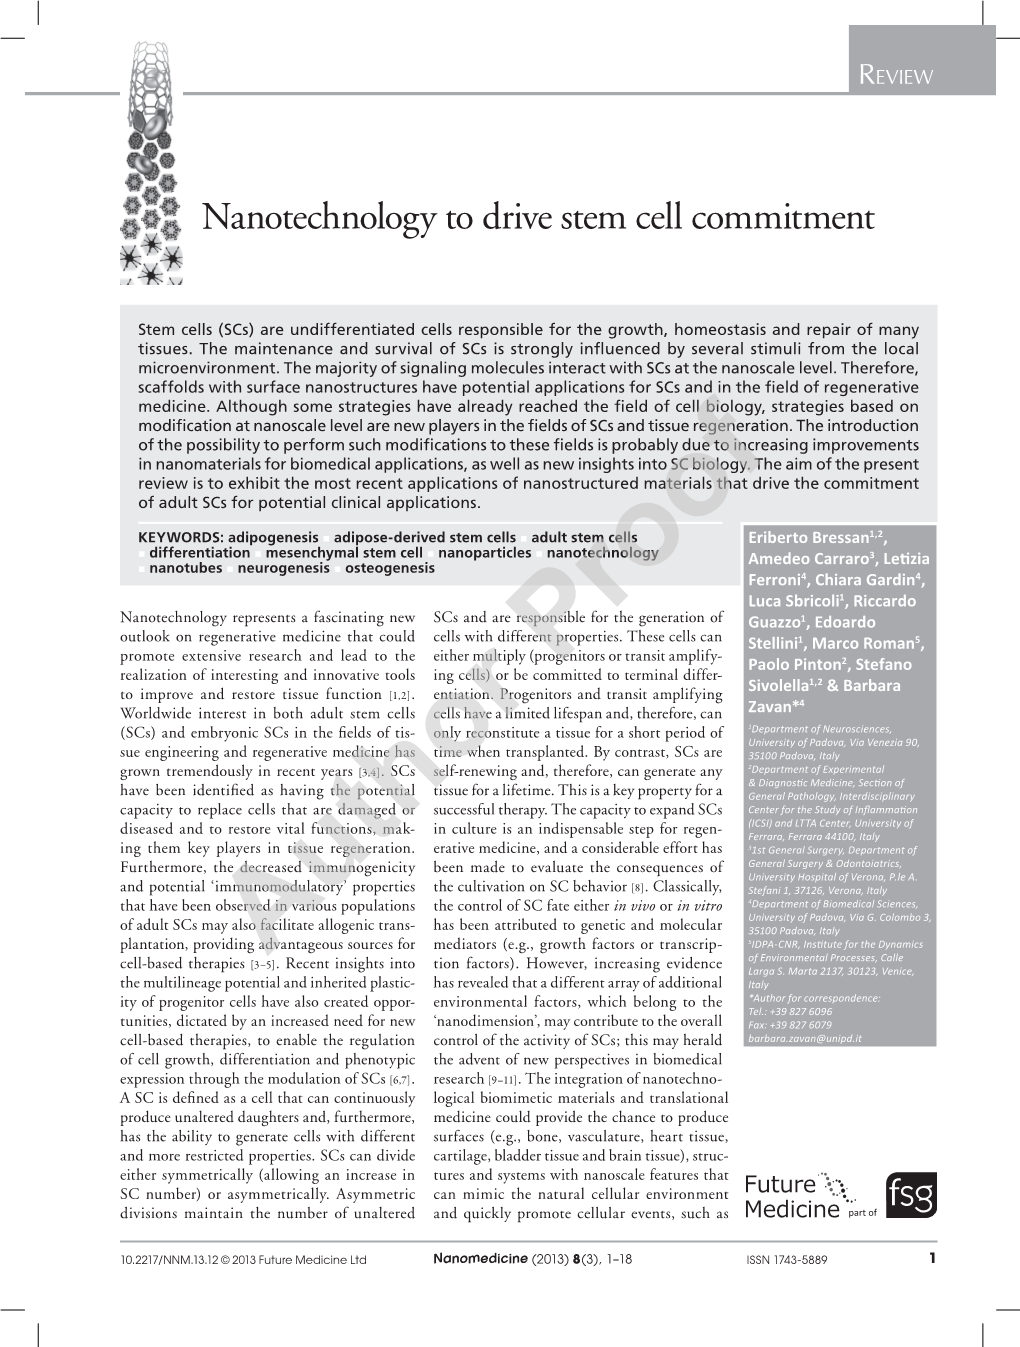 Nanotechnology to Drive Stem Cell Commitment